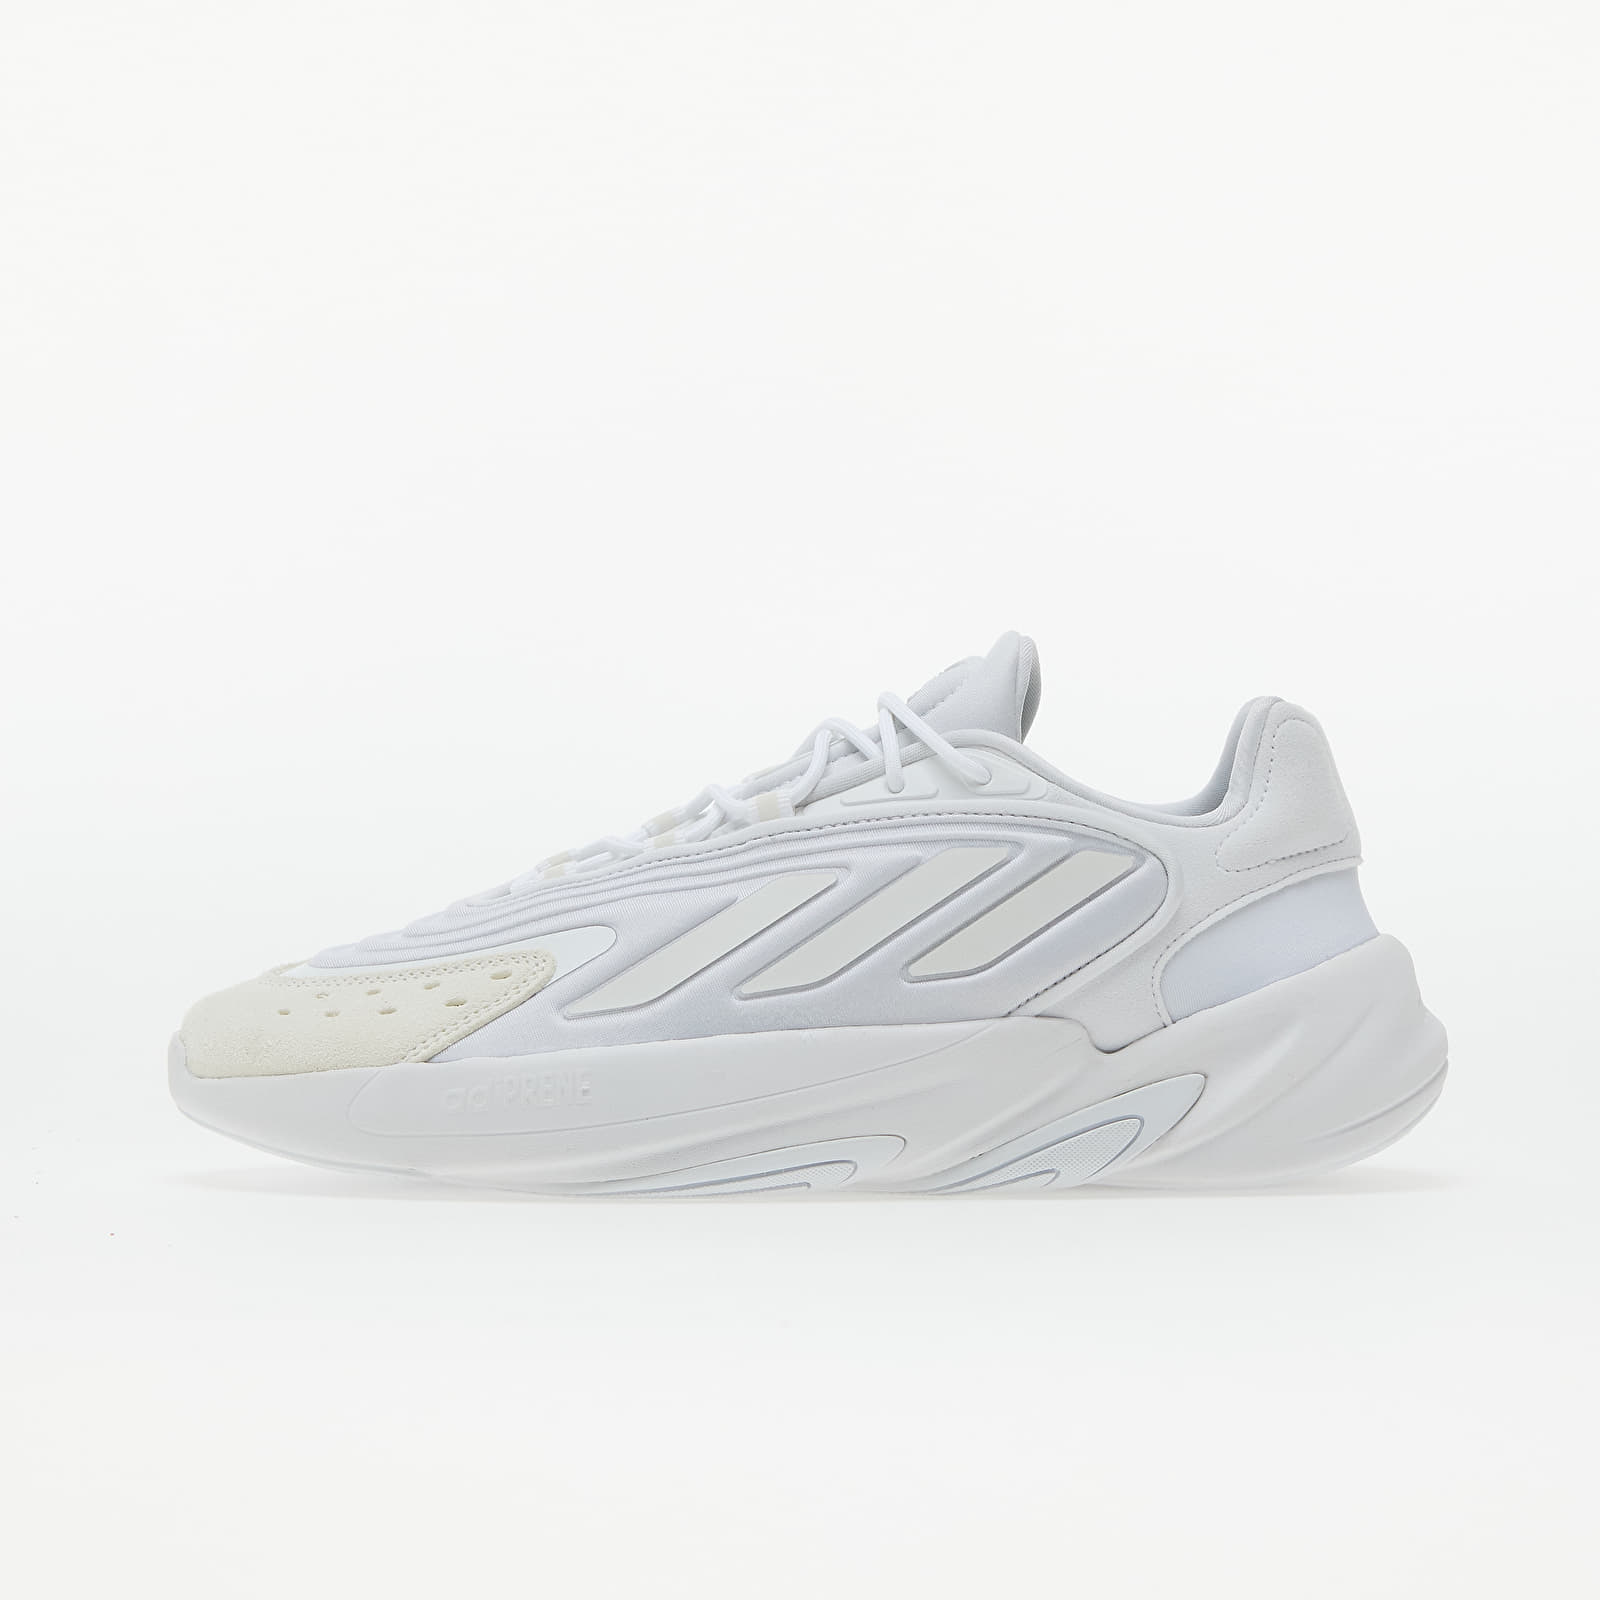 Chaussures et baskets homme adidas Ozelia Ftw White/ Ftw White/ Crystal White